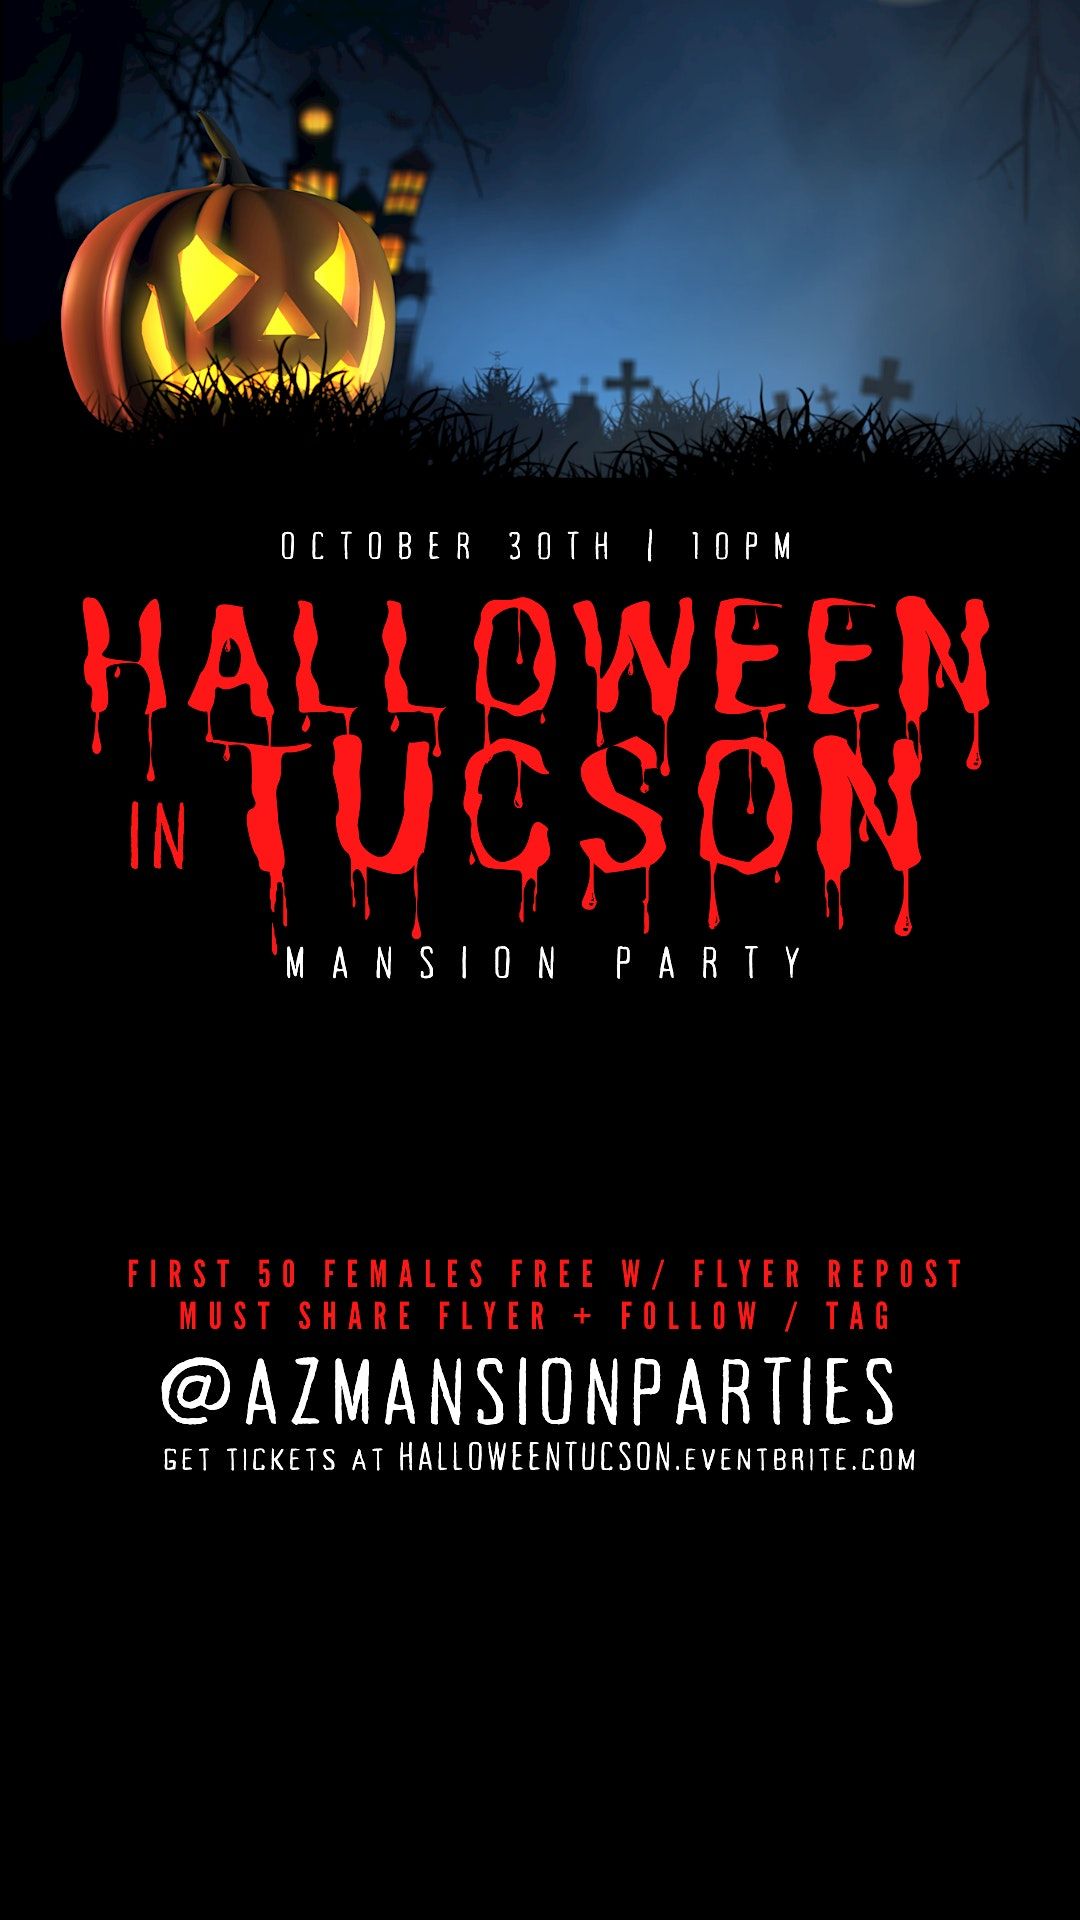 Halloween In Tucson Mansion Party Best Costume Wins 1K!, PRIVATE